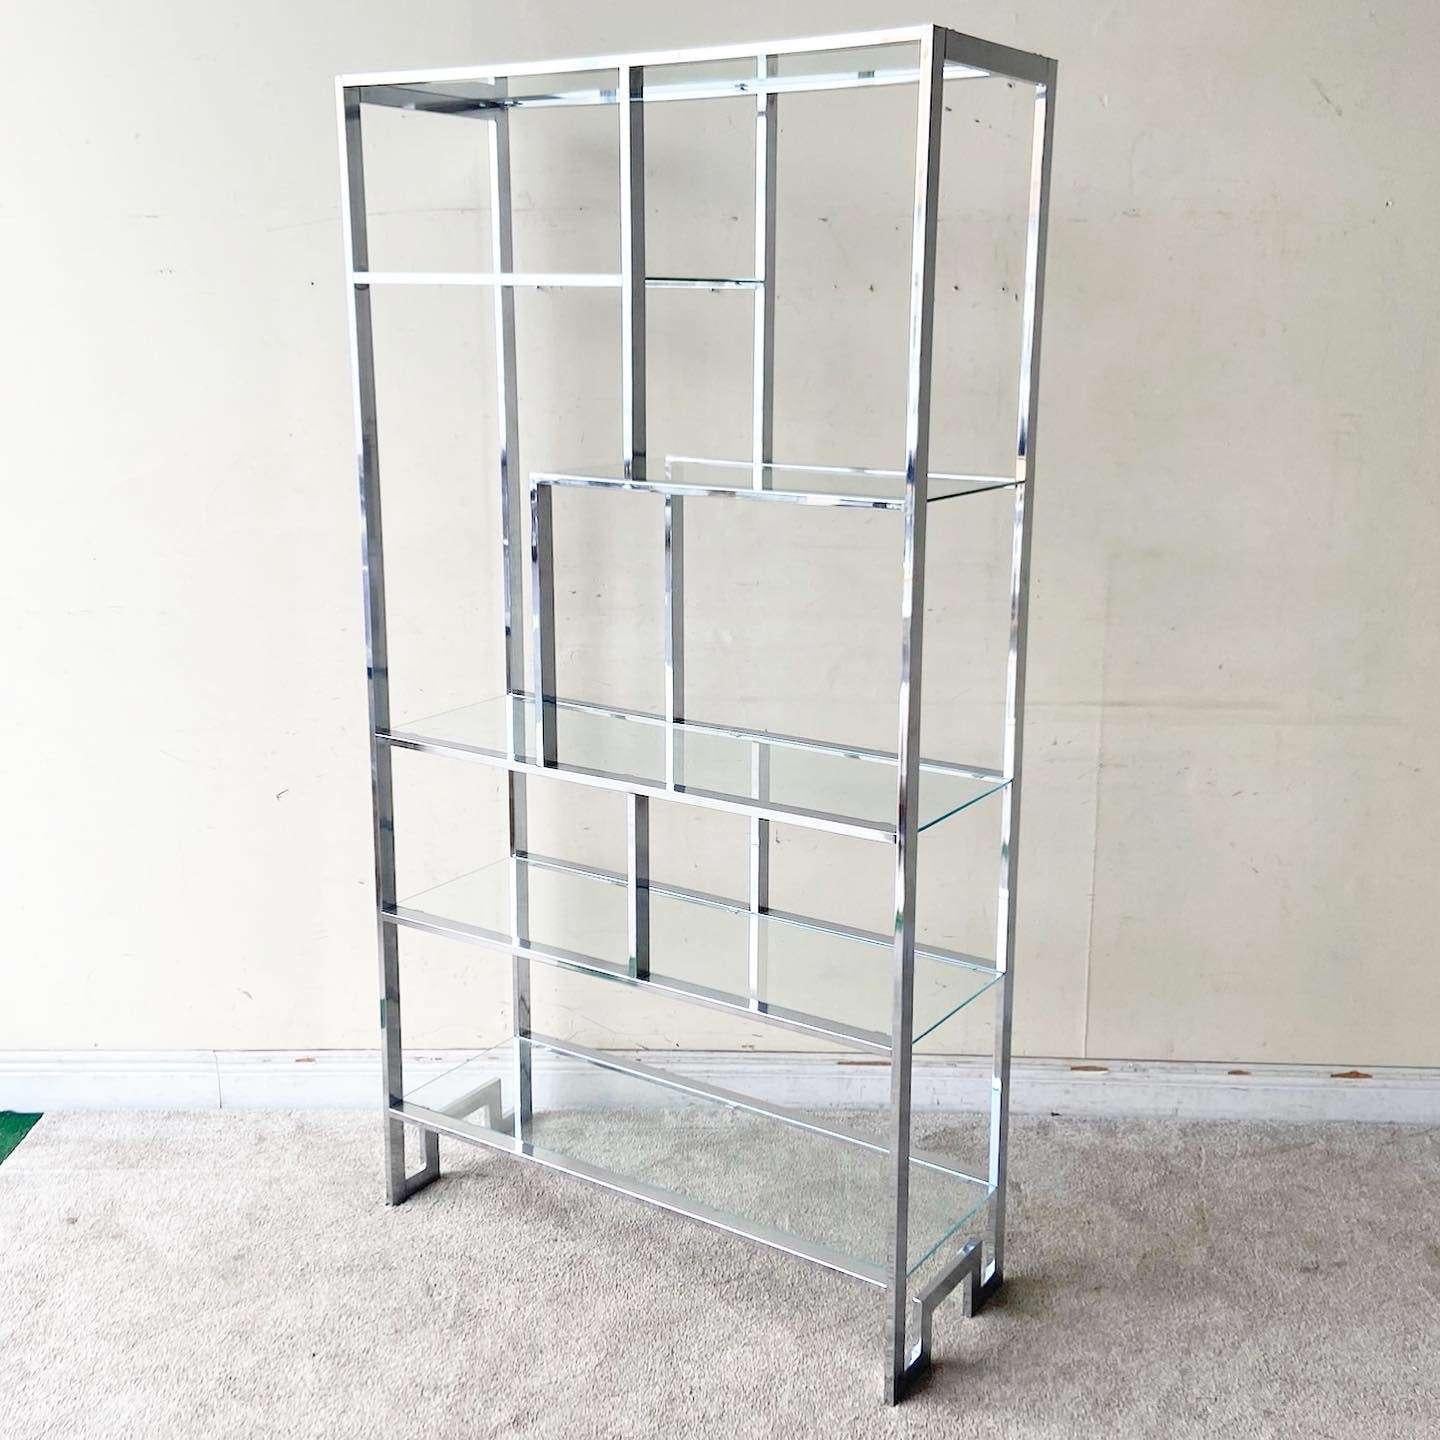 Exceptional vintage mid century modern chinoiserie chrome Etagere. Features 5 glass shelves.